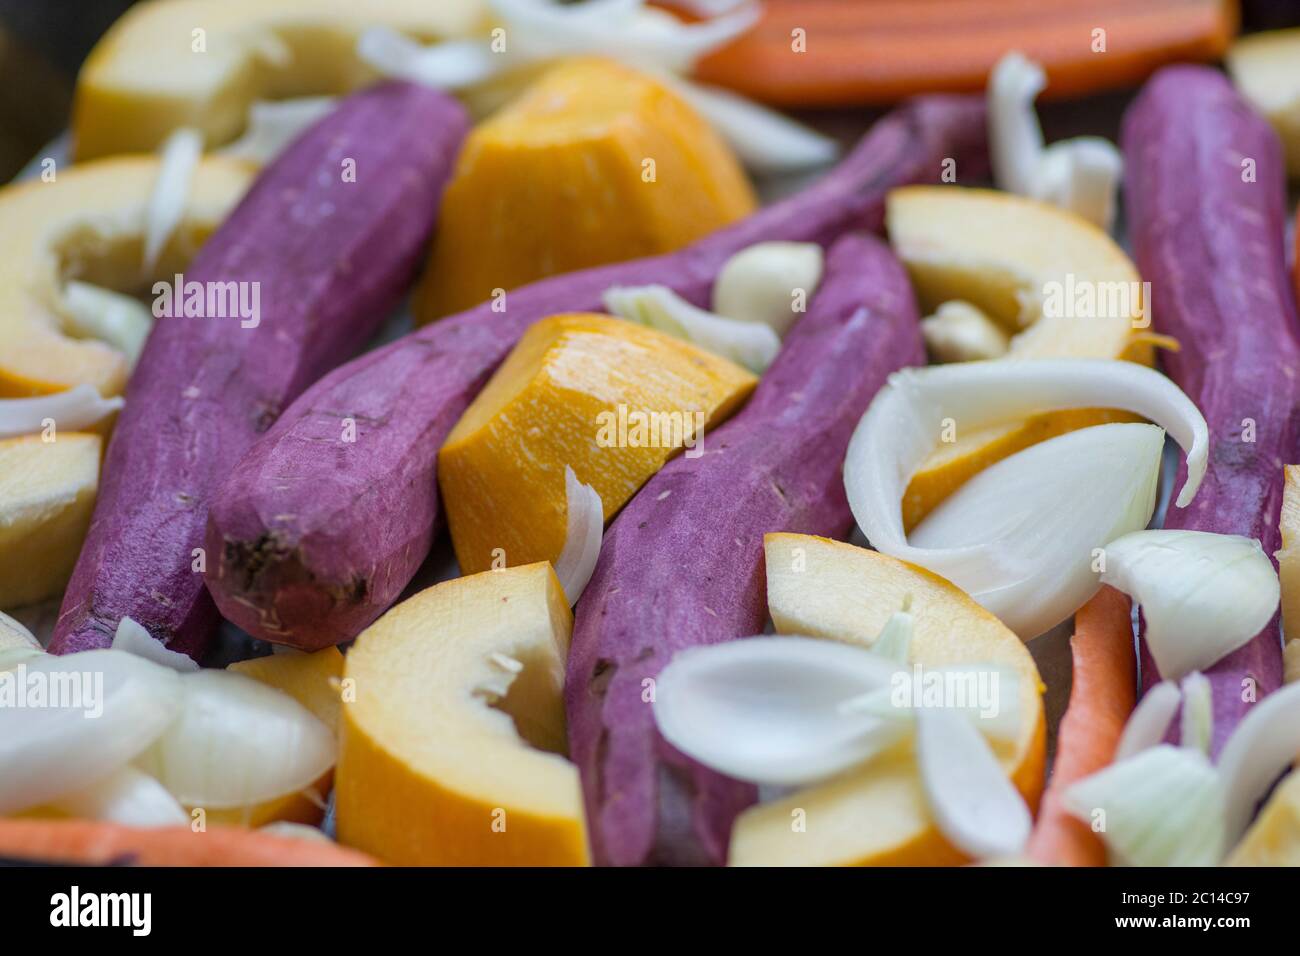 Colorful mix of root vegetables: carrots, yellow pumpkin, purple sweet potatoes, onions and garlic. Stock Photo